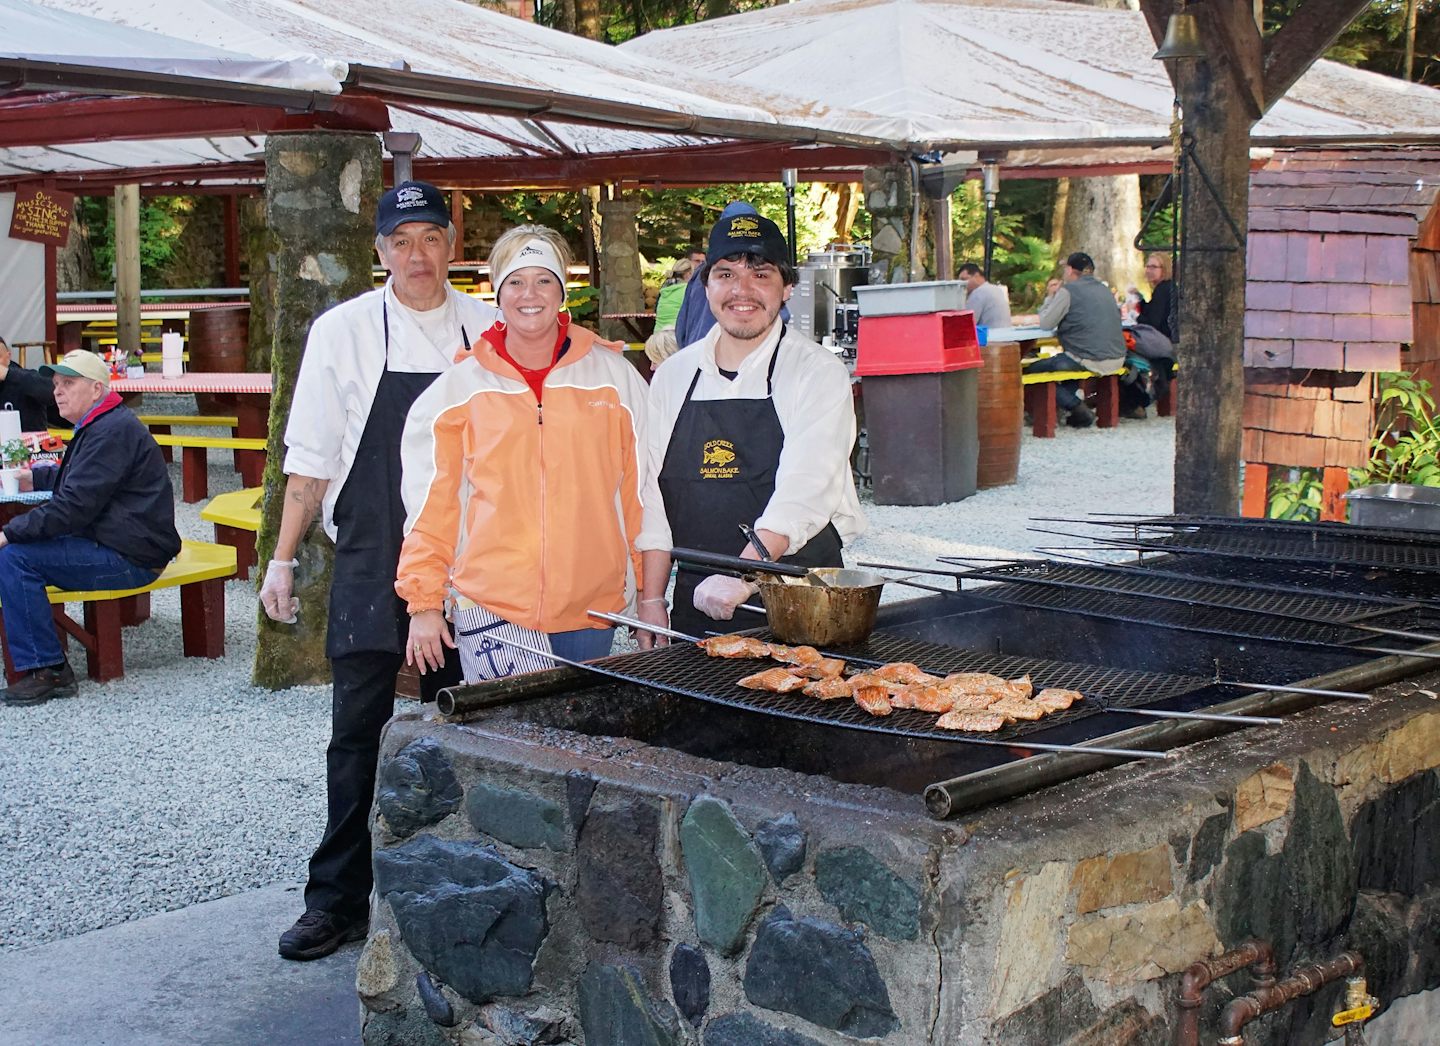 This is Dave and Juan smoking salmon in Juneau during our gold panning and salmon bake excursion.